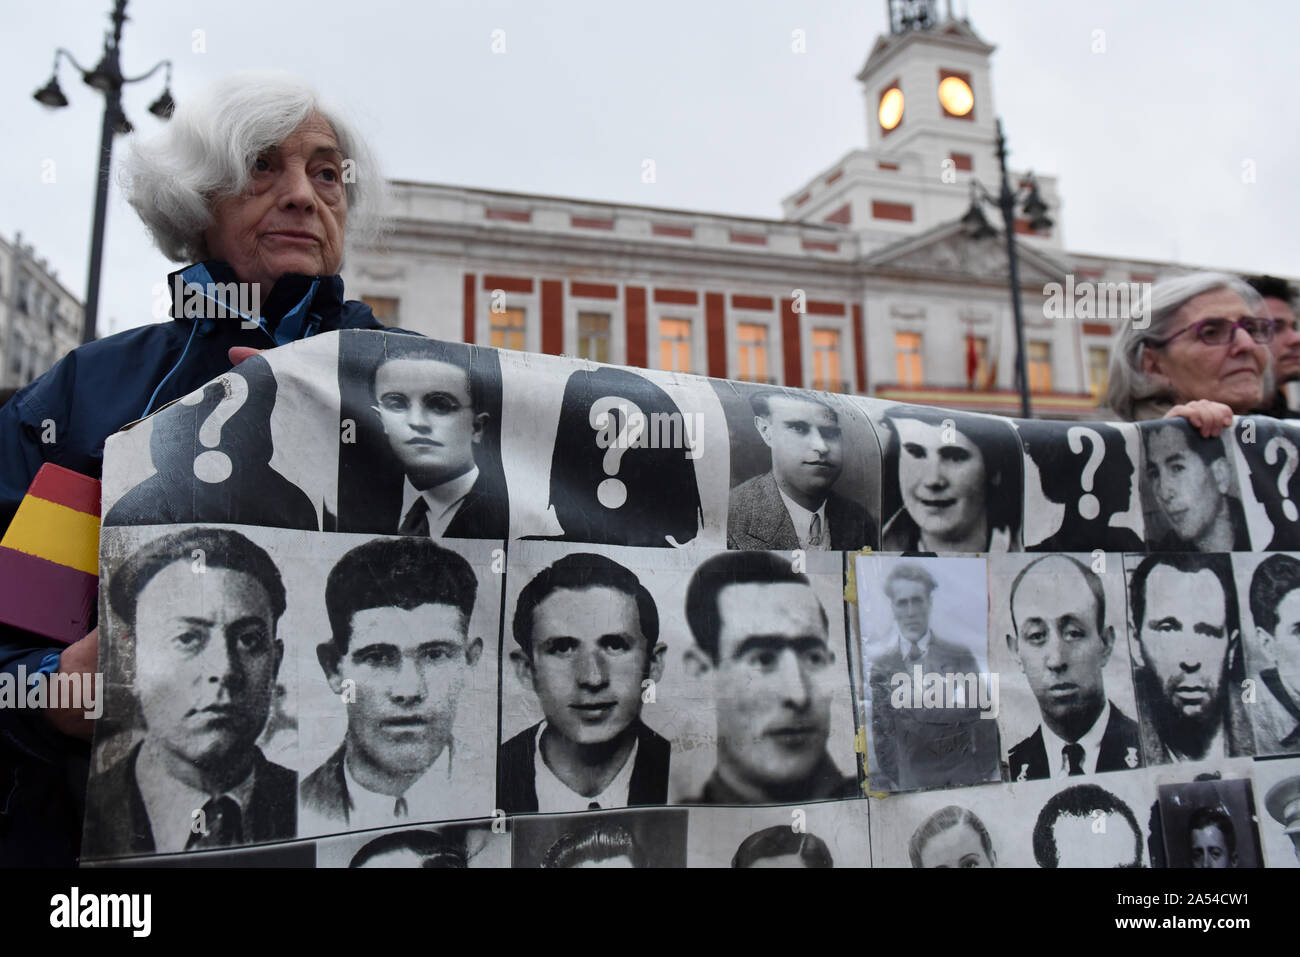 Madrid, Spain. 17th Oct, 2019. A protester holding a banner with pictures of people who went missing during the Spanish dictatorship of Francisco Franco (1936-1975).Around 50 people gathered in Madrid to protest against immunity for the crimes committed during the Francisco Franco's dictatorship, and to demand justice for victims and relatives. Spanish government has announced that the remains of Franco will be exhumed from Valle de los Caidos mausoleum, where they have lain since his death in 1975, the next week. Credit: SOPA Images Limited/Alamy Live News Stock Photo